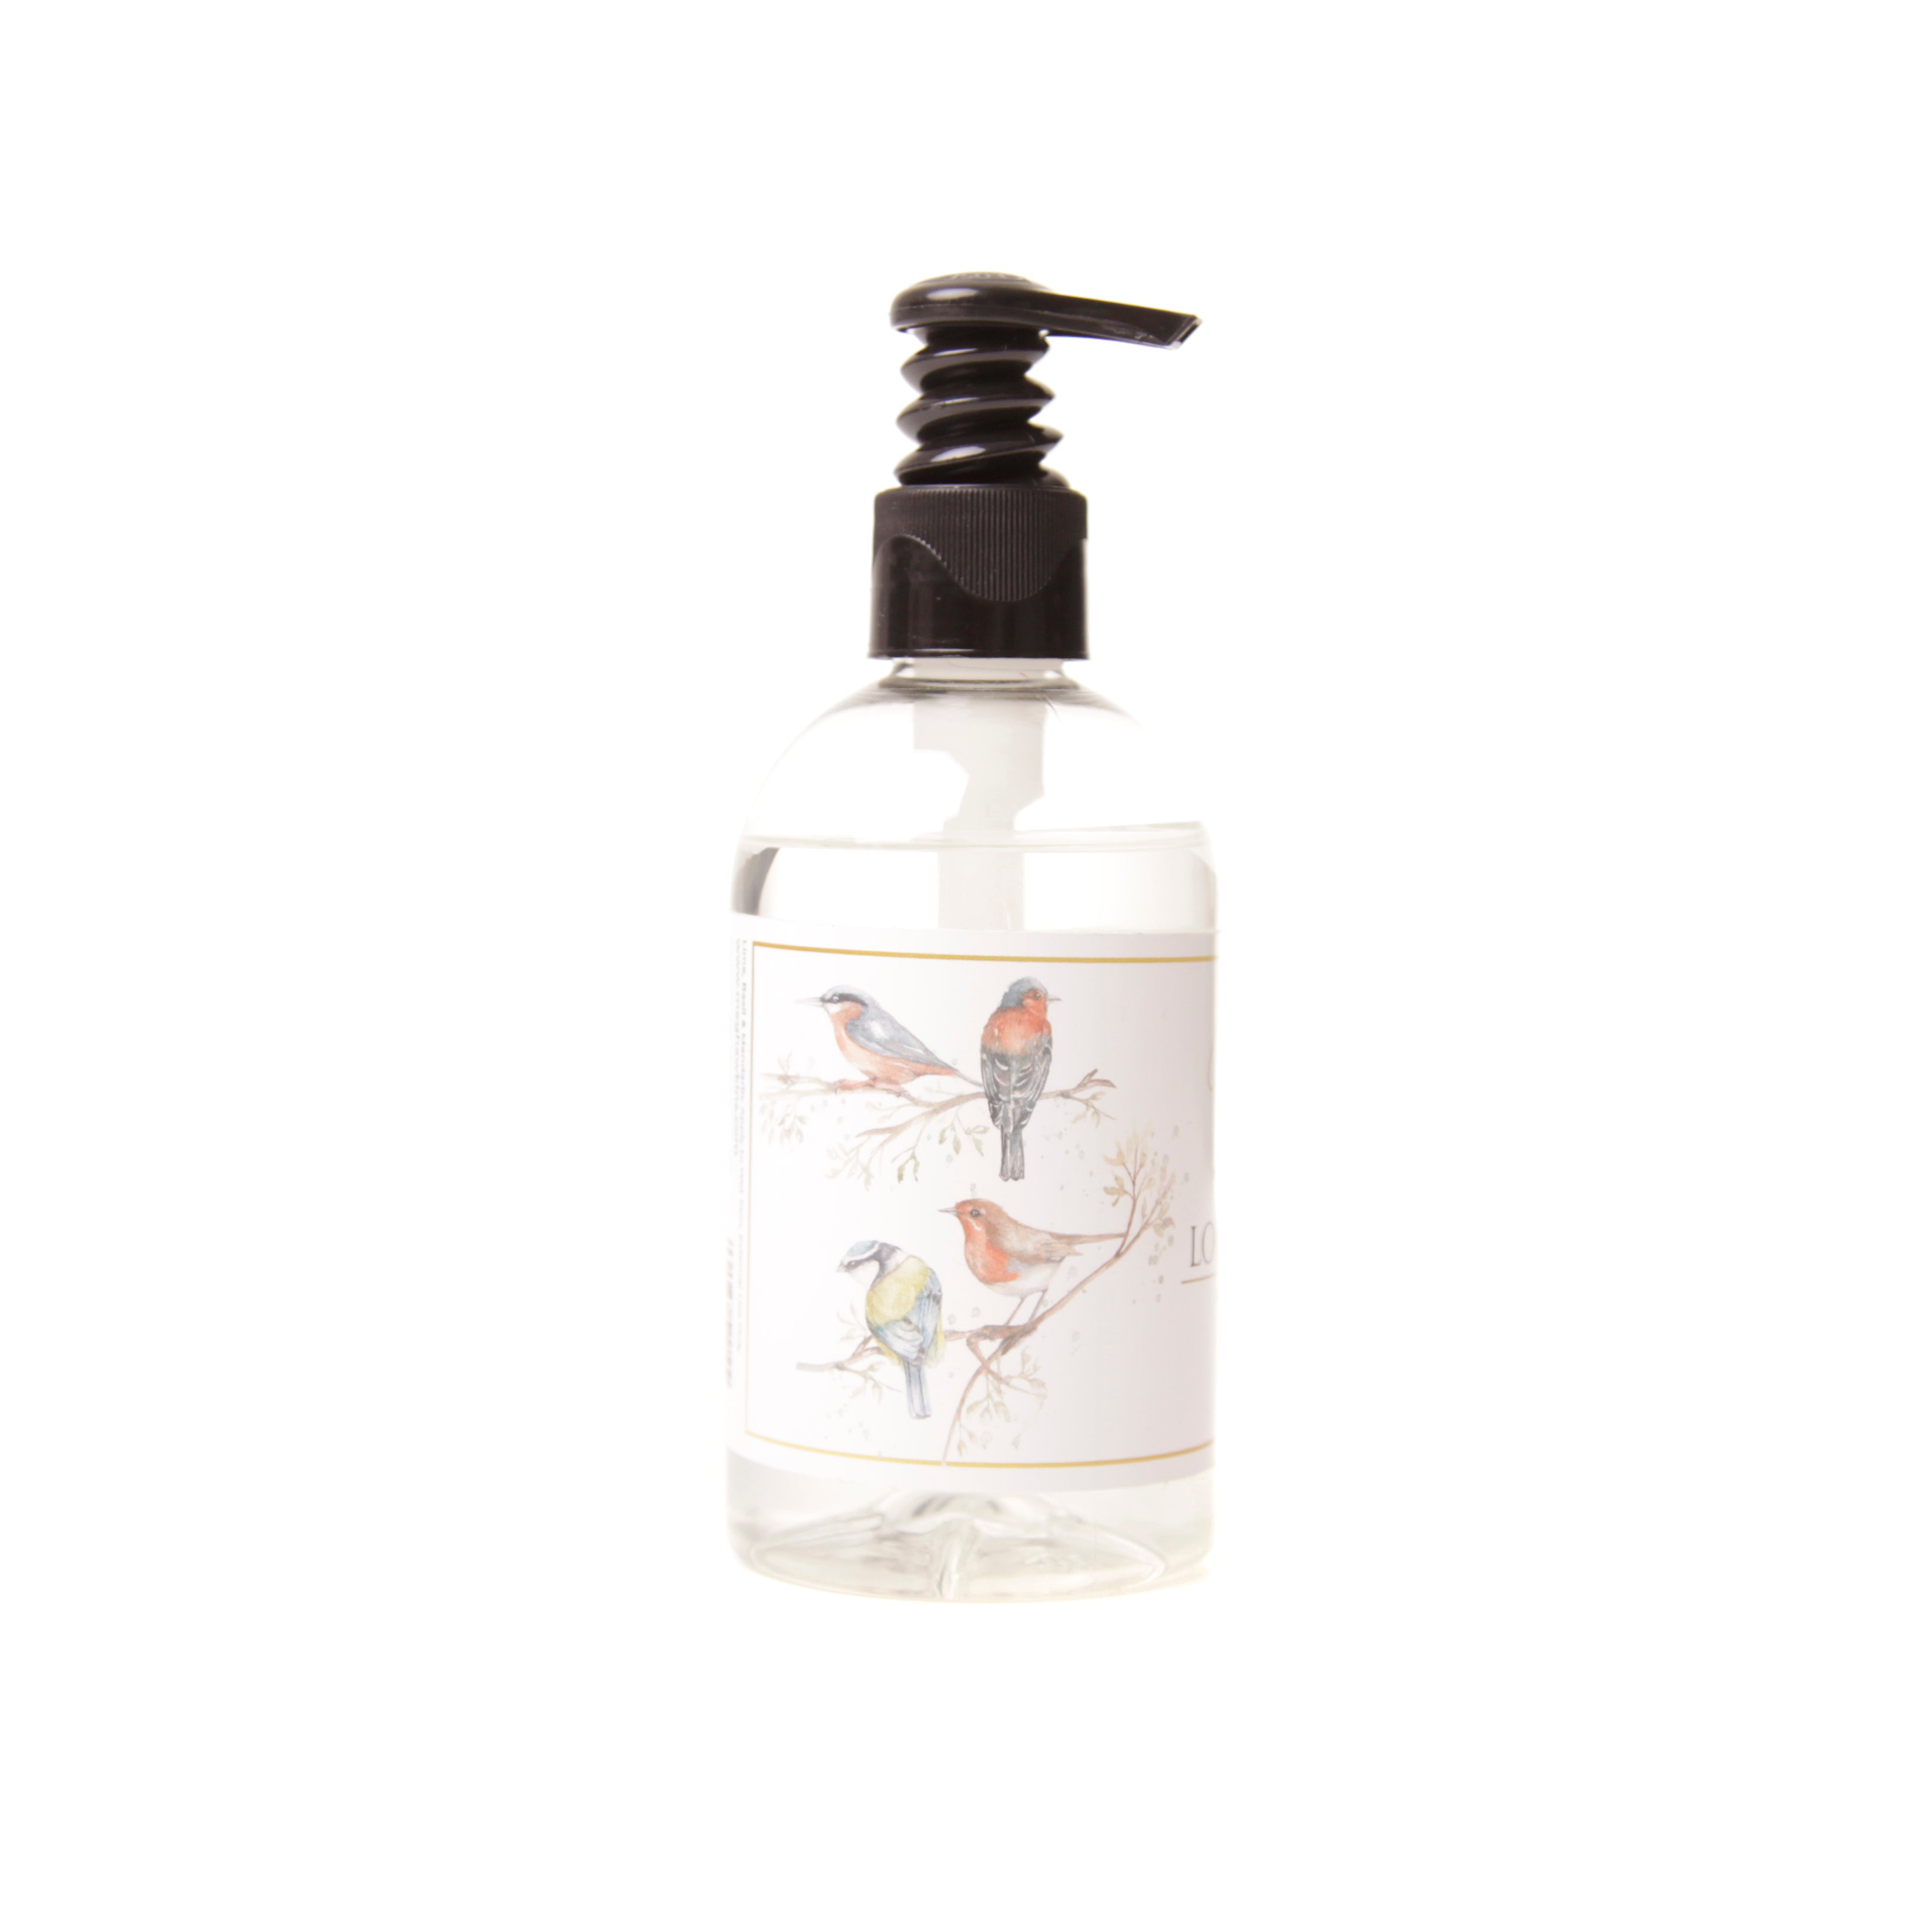 'The Lookout' Hand Wash with British Birds Design